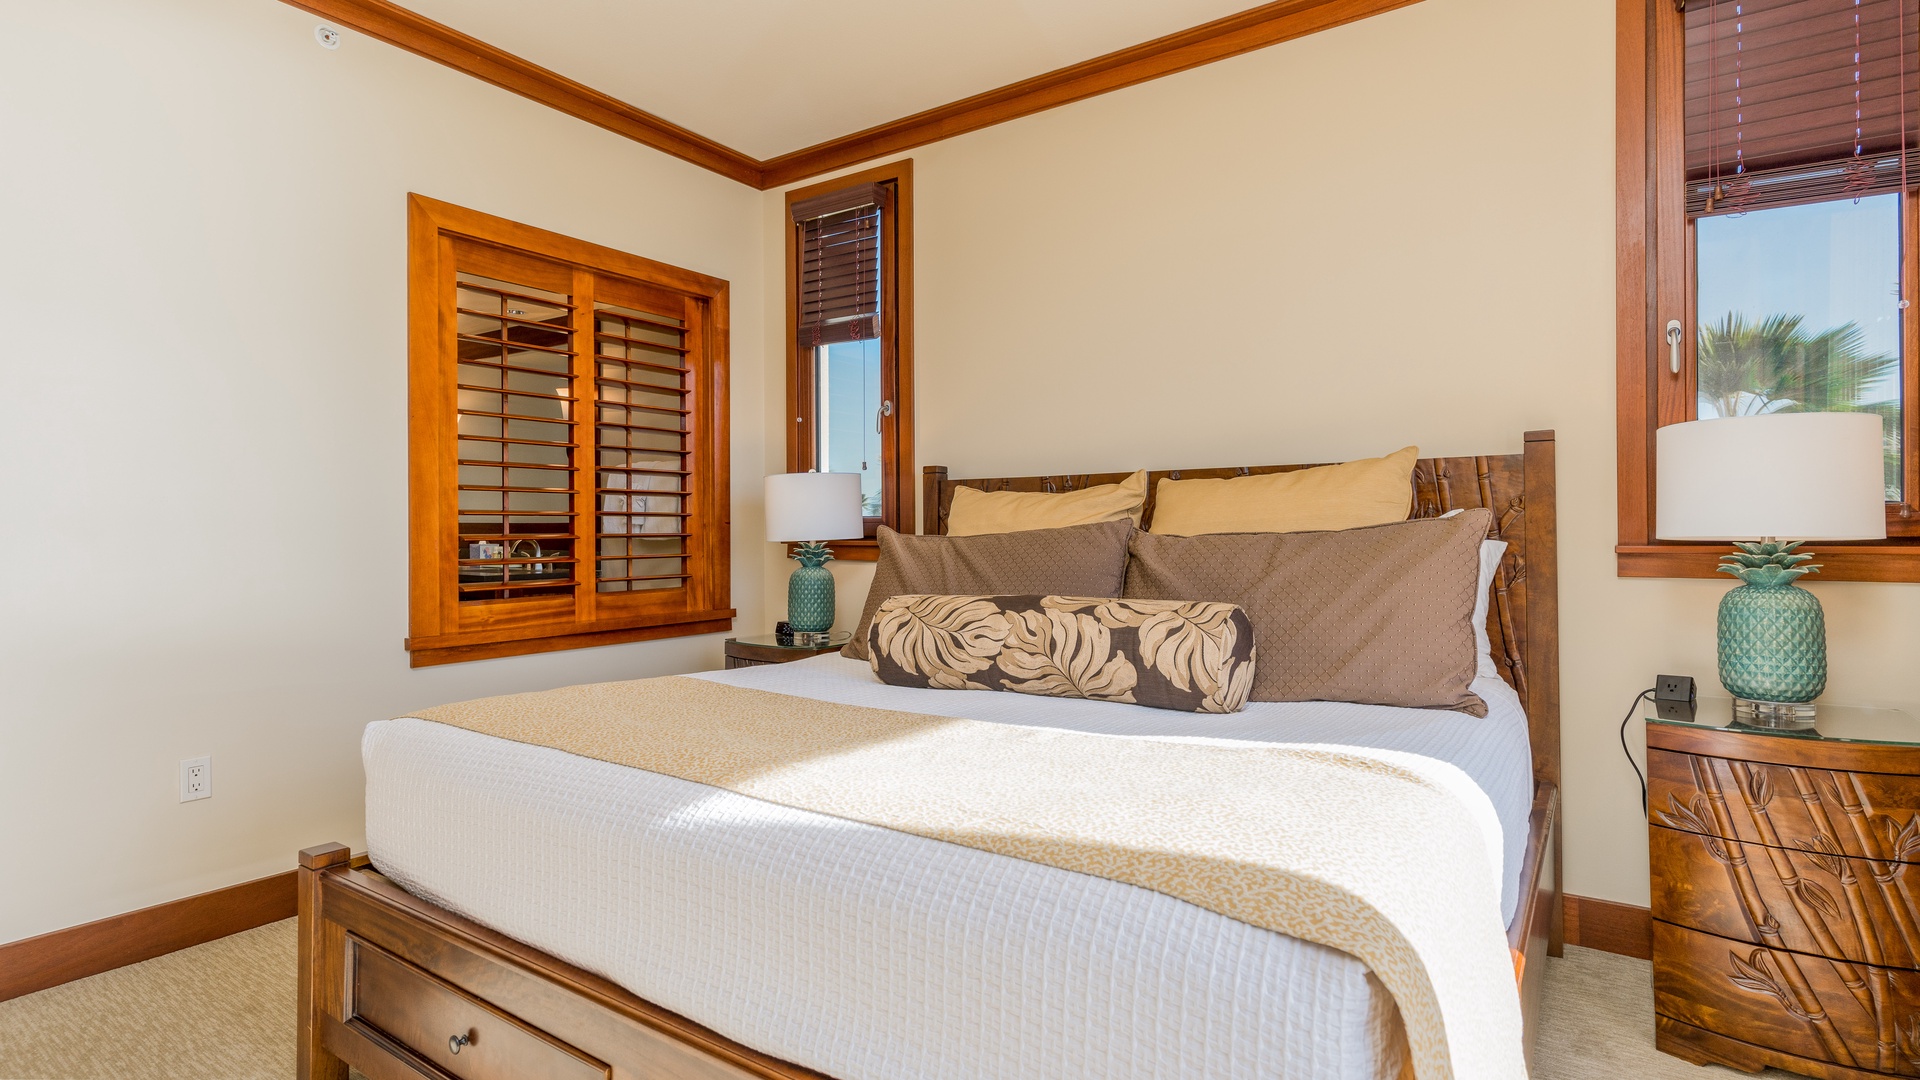 Kapolei Vacation Rentals, Ko Olina Beach Villas B309 - The beautifully appointed primary guest bedroom.